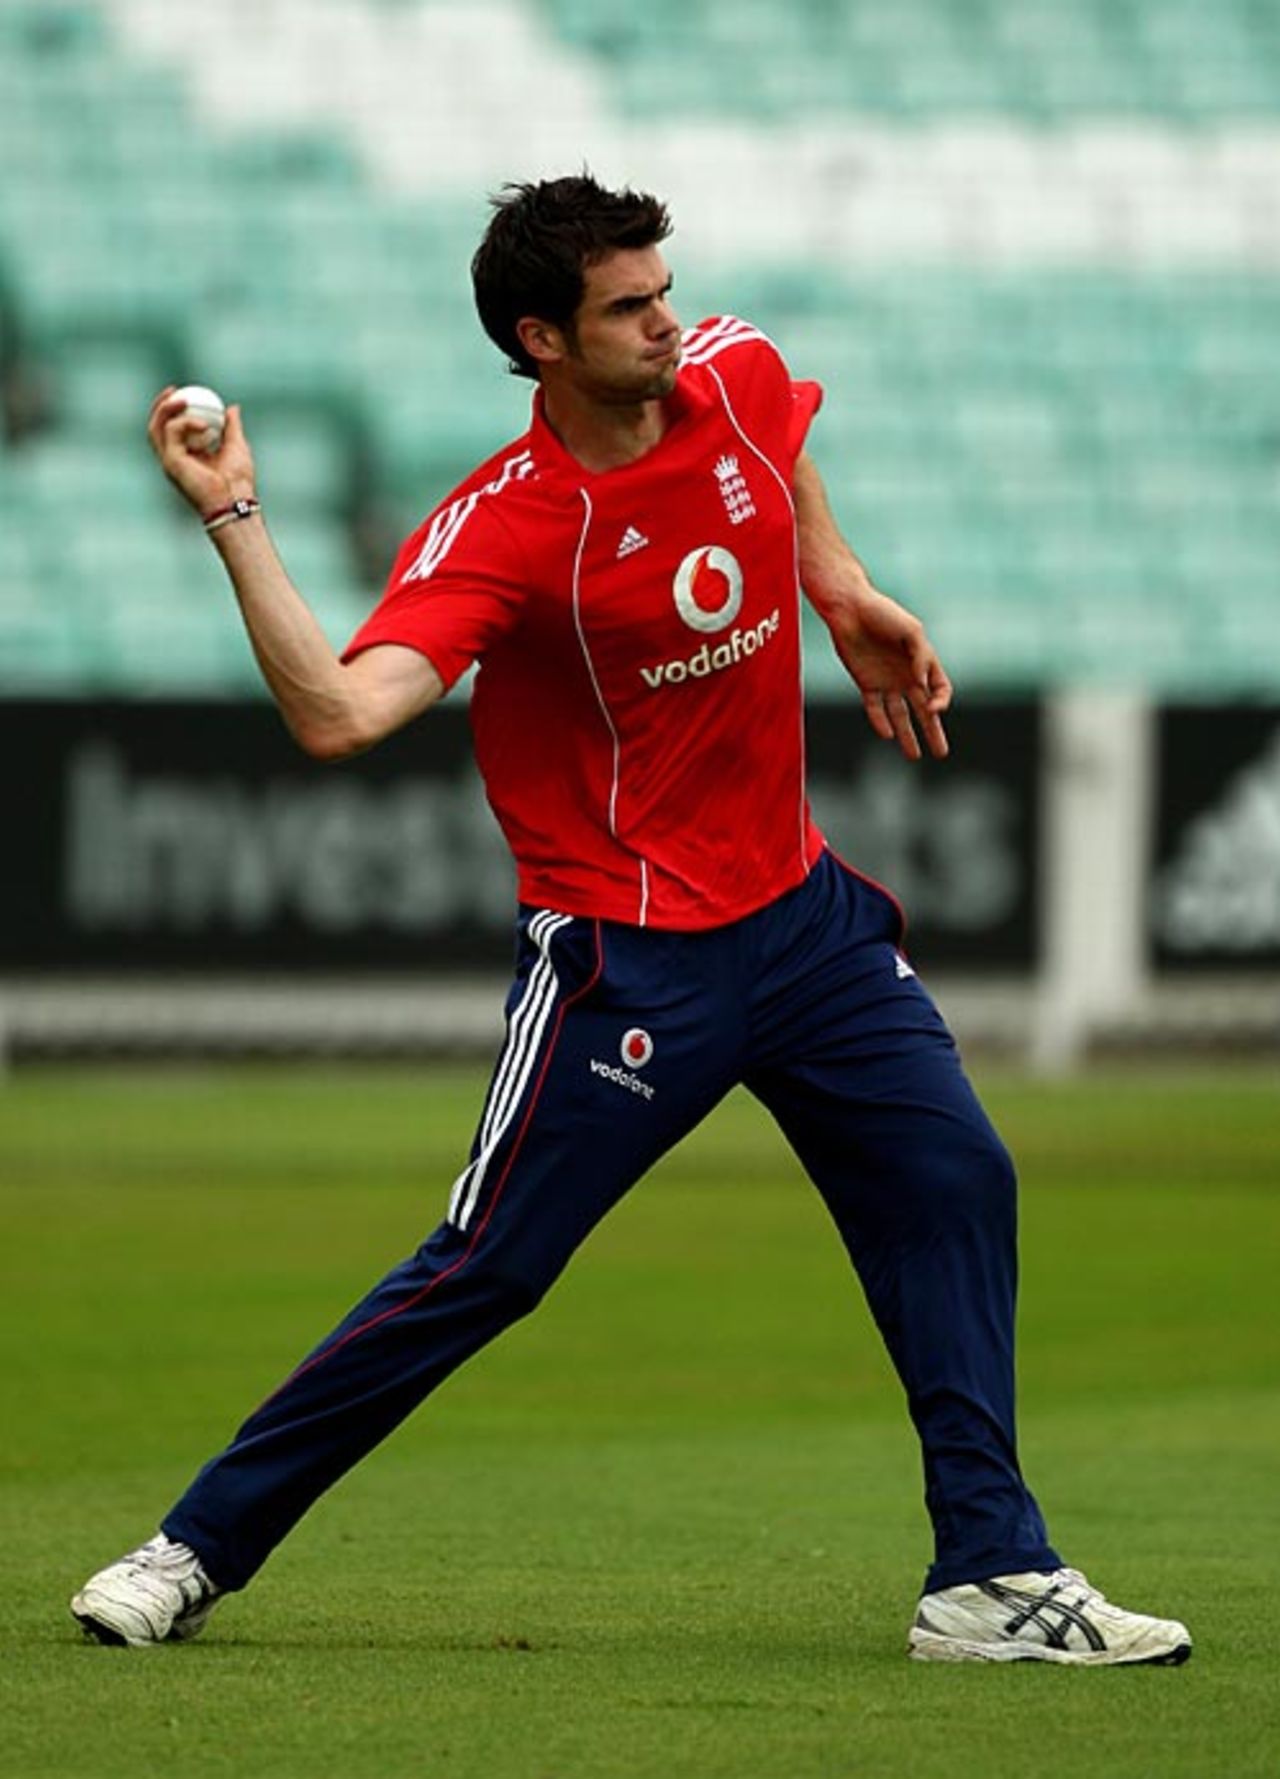 James Anderson tests his arm, The Oval, August 28, 2008